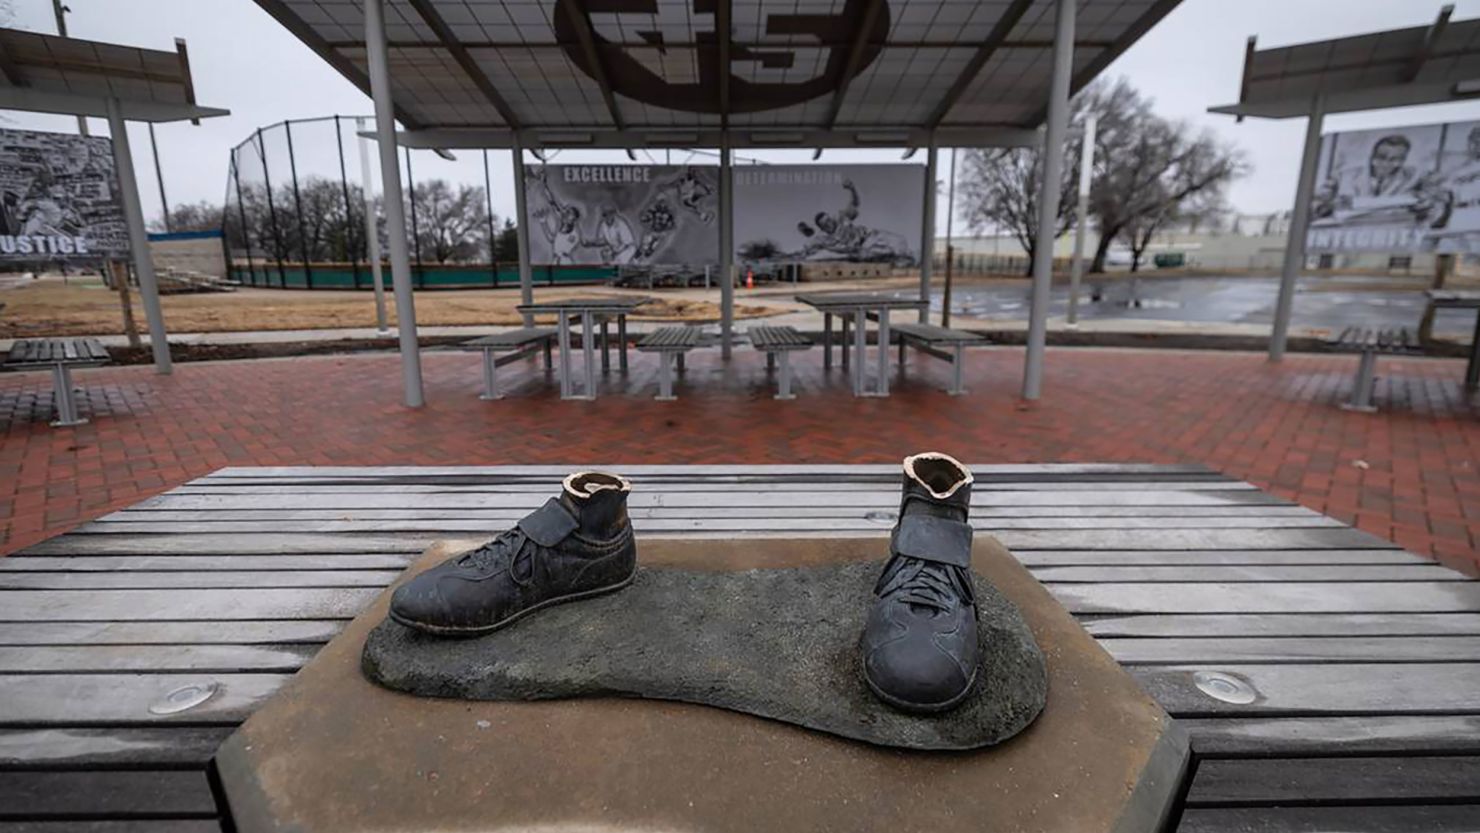 Only the feet remain after a statue of legendary baseball pioneer Jackie Robinson was stolen from the League 42 field in Wichita, Kansas.